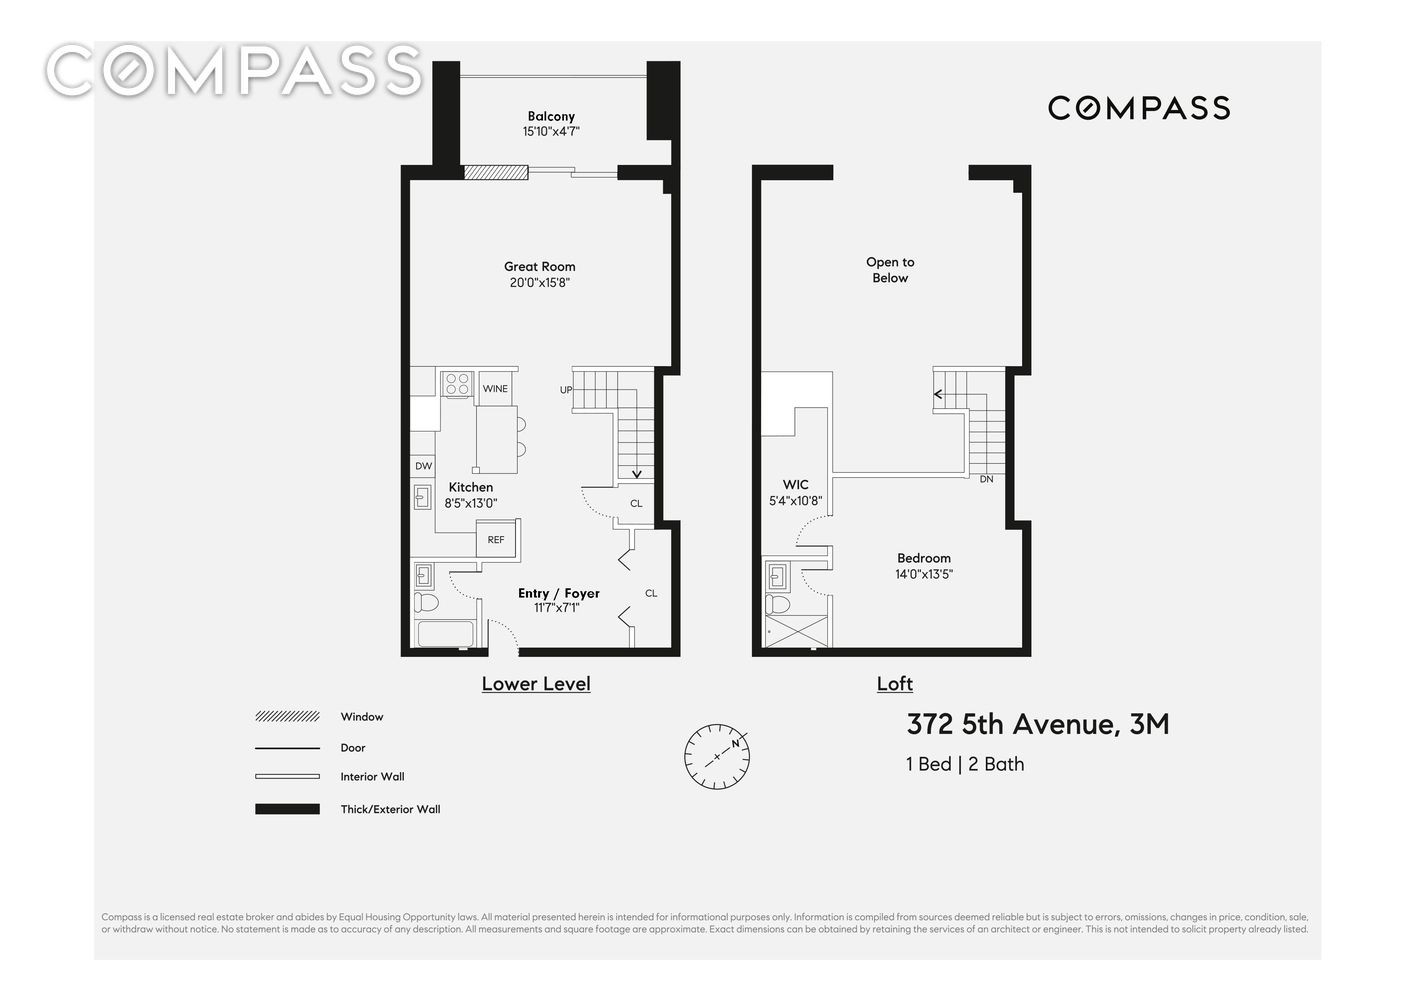 Property at 372 FIFTH AVE, 3M Midtown West, New York, New York 10018